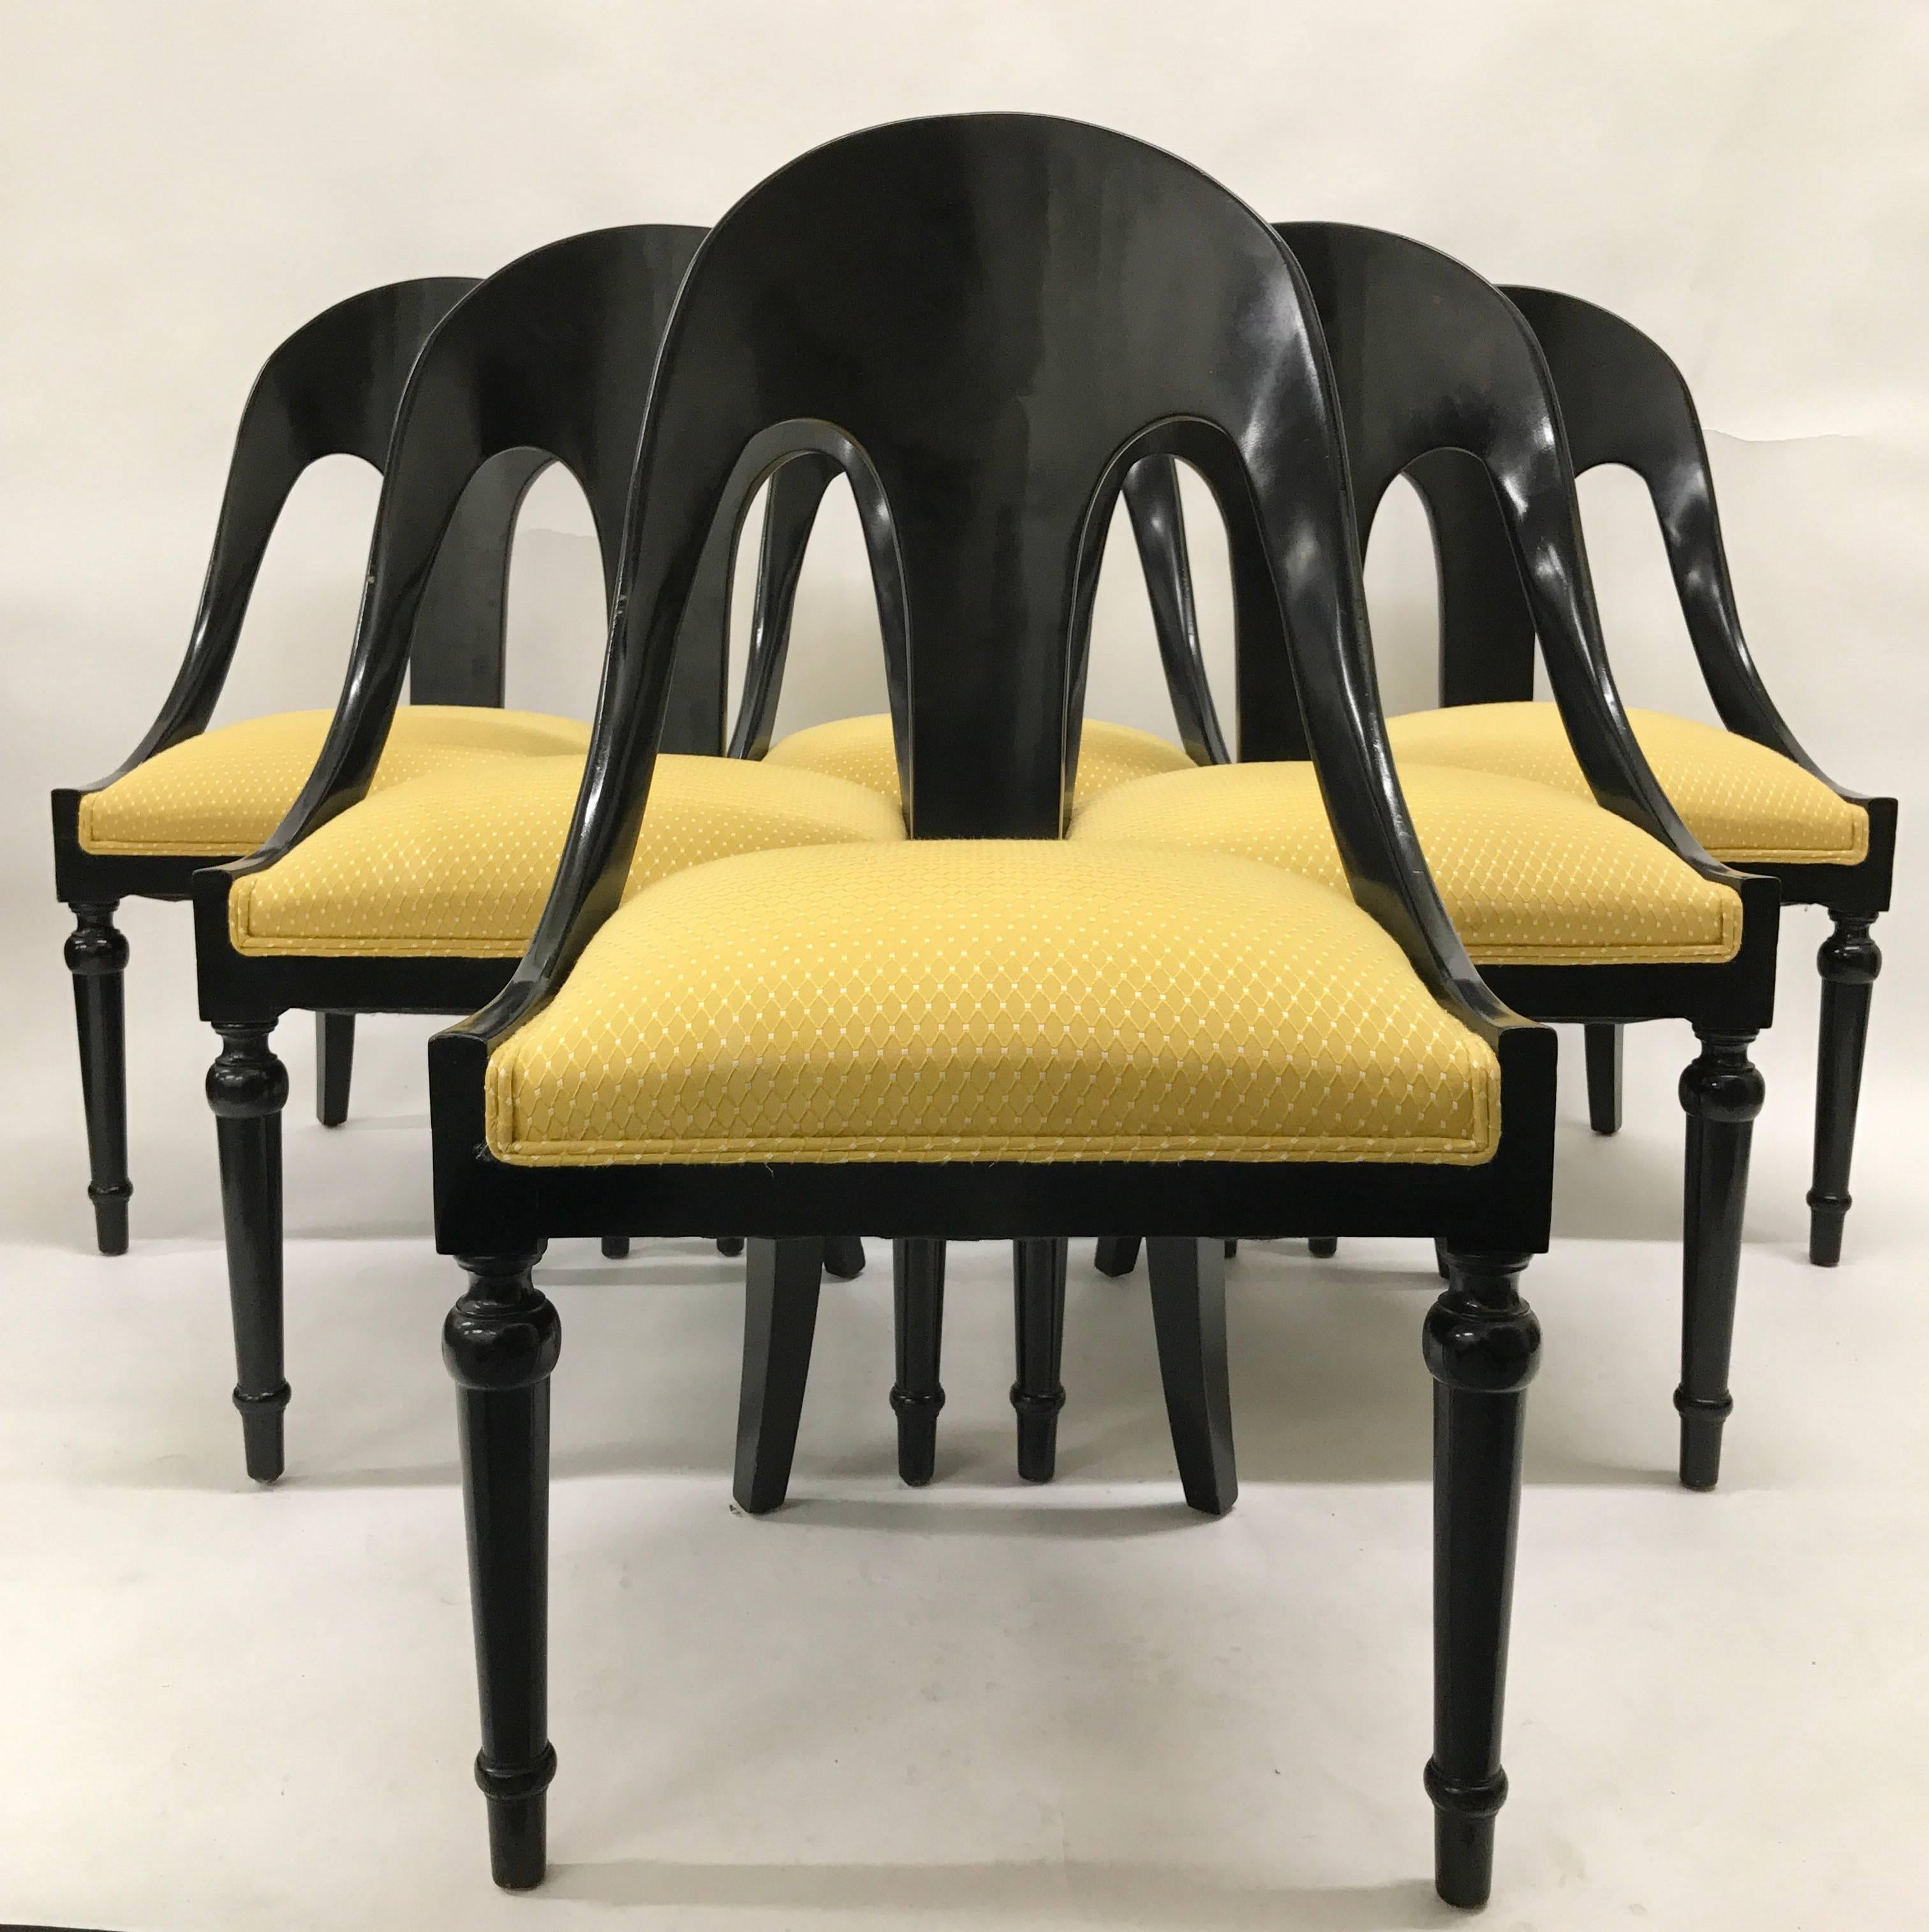 Set of six neoclassical style black lacquer spoon back dining chairs, 1940s.